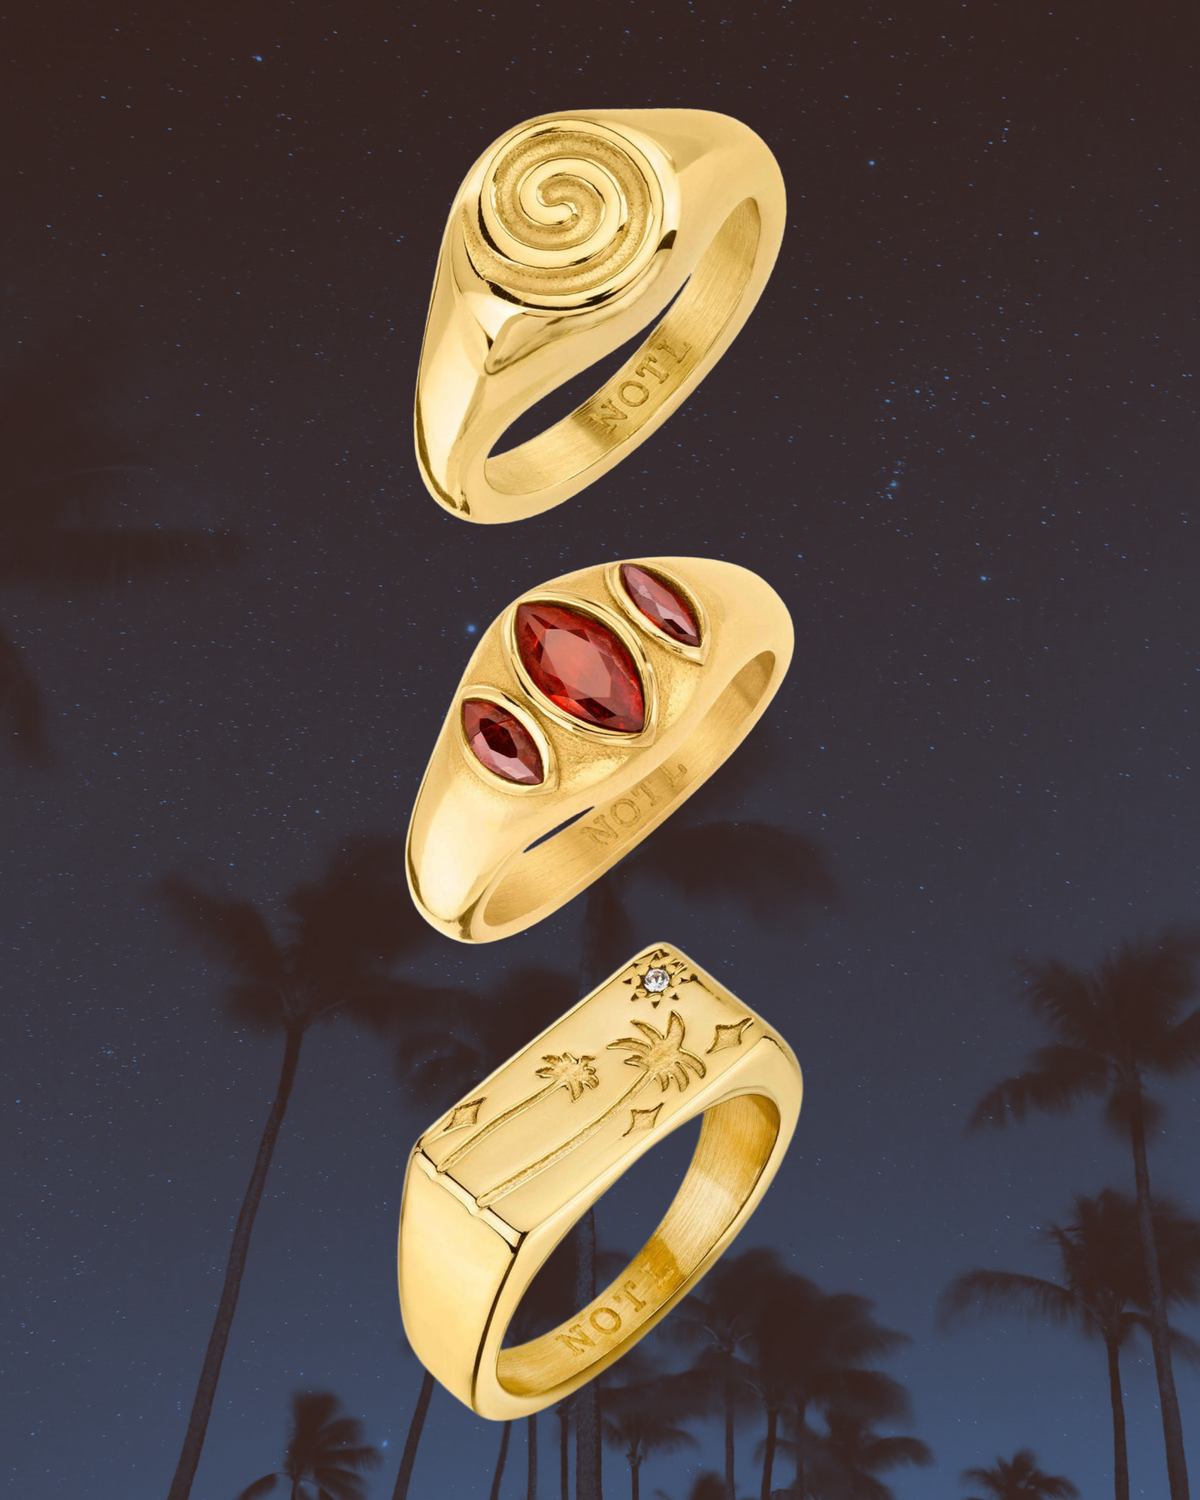 Eventide ring sets